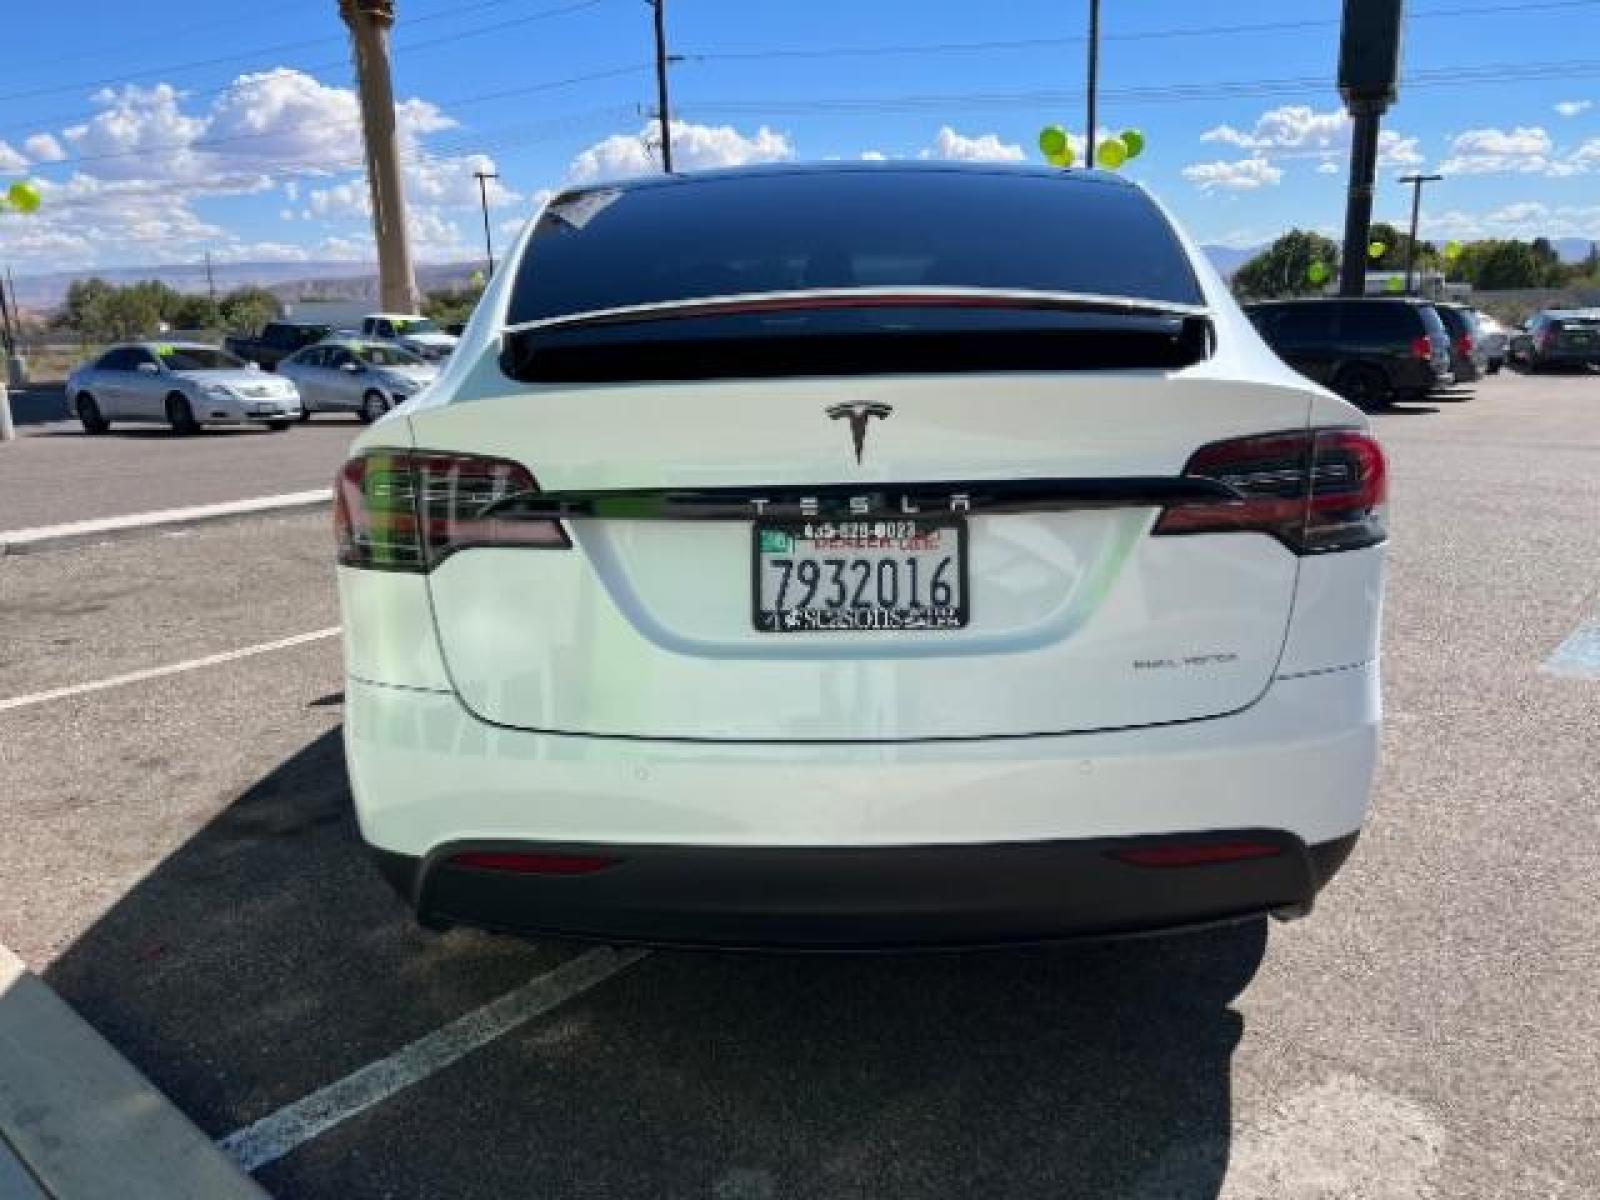 2019 Pearl White Multi-Coat /All Black, leatherette Tesla Model X Standard Range (5YJXCAE21KF) with an ELECTRIC engine, 1-Speed Automatic transmission, located at 1865 East Red Hills Pkwy, St. George, 84770, (435) 628-0023, 37.120850, -113.543640 - AWD, 7 Seats, Autopilot, Raven, Cold weather package, Adaptive suspension, Tow hitch, 2 remotes, FSD computer 3.0 upgrade. Gets 270 miles on a full charge. Black chrome delete vinyl (removeable). This is a beautiful 1 owner MX for way less money and less waiting compared to ordering from Tesla. Bump - Photo #7